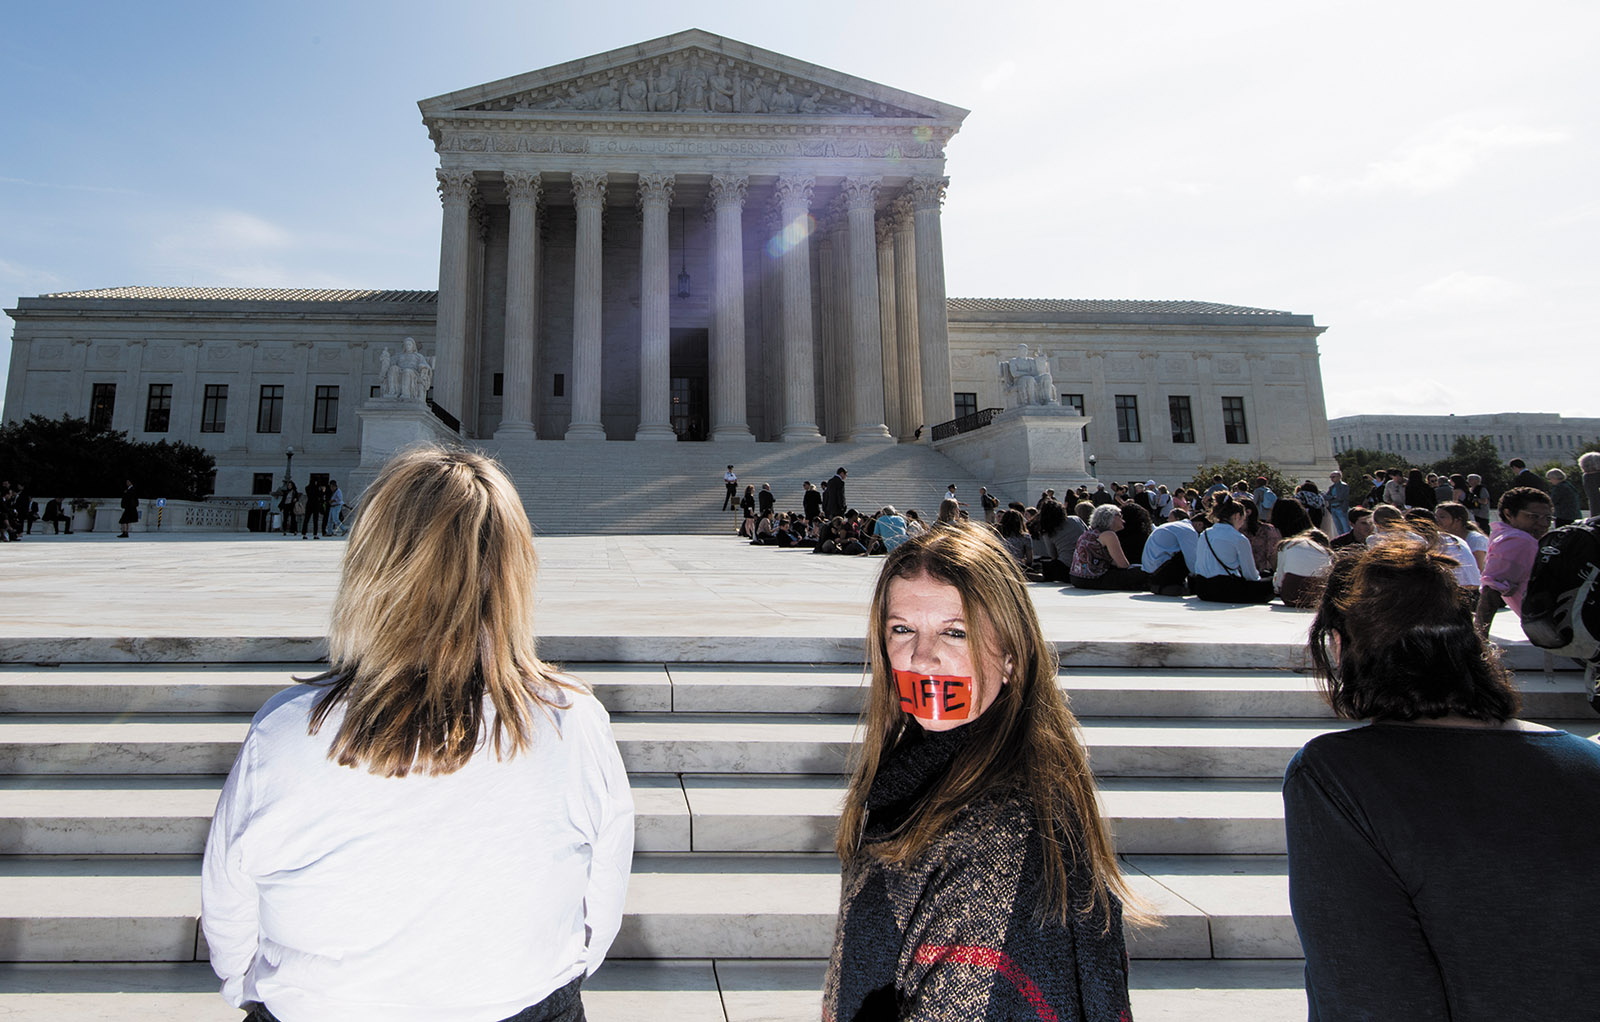 Anti-abortion demonstrators on the first day of the Supreme Court’s new session, Washington, D.C., October 2019